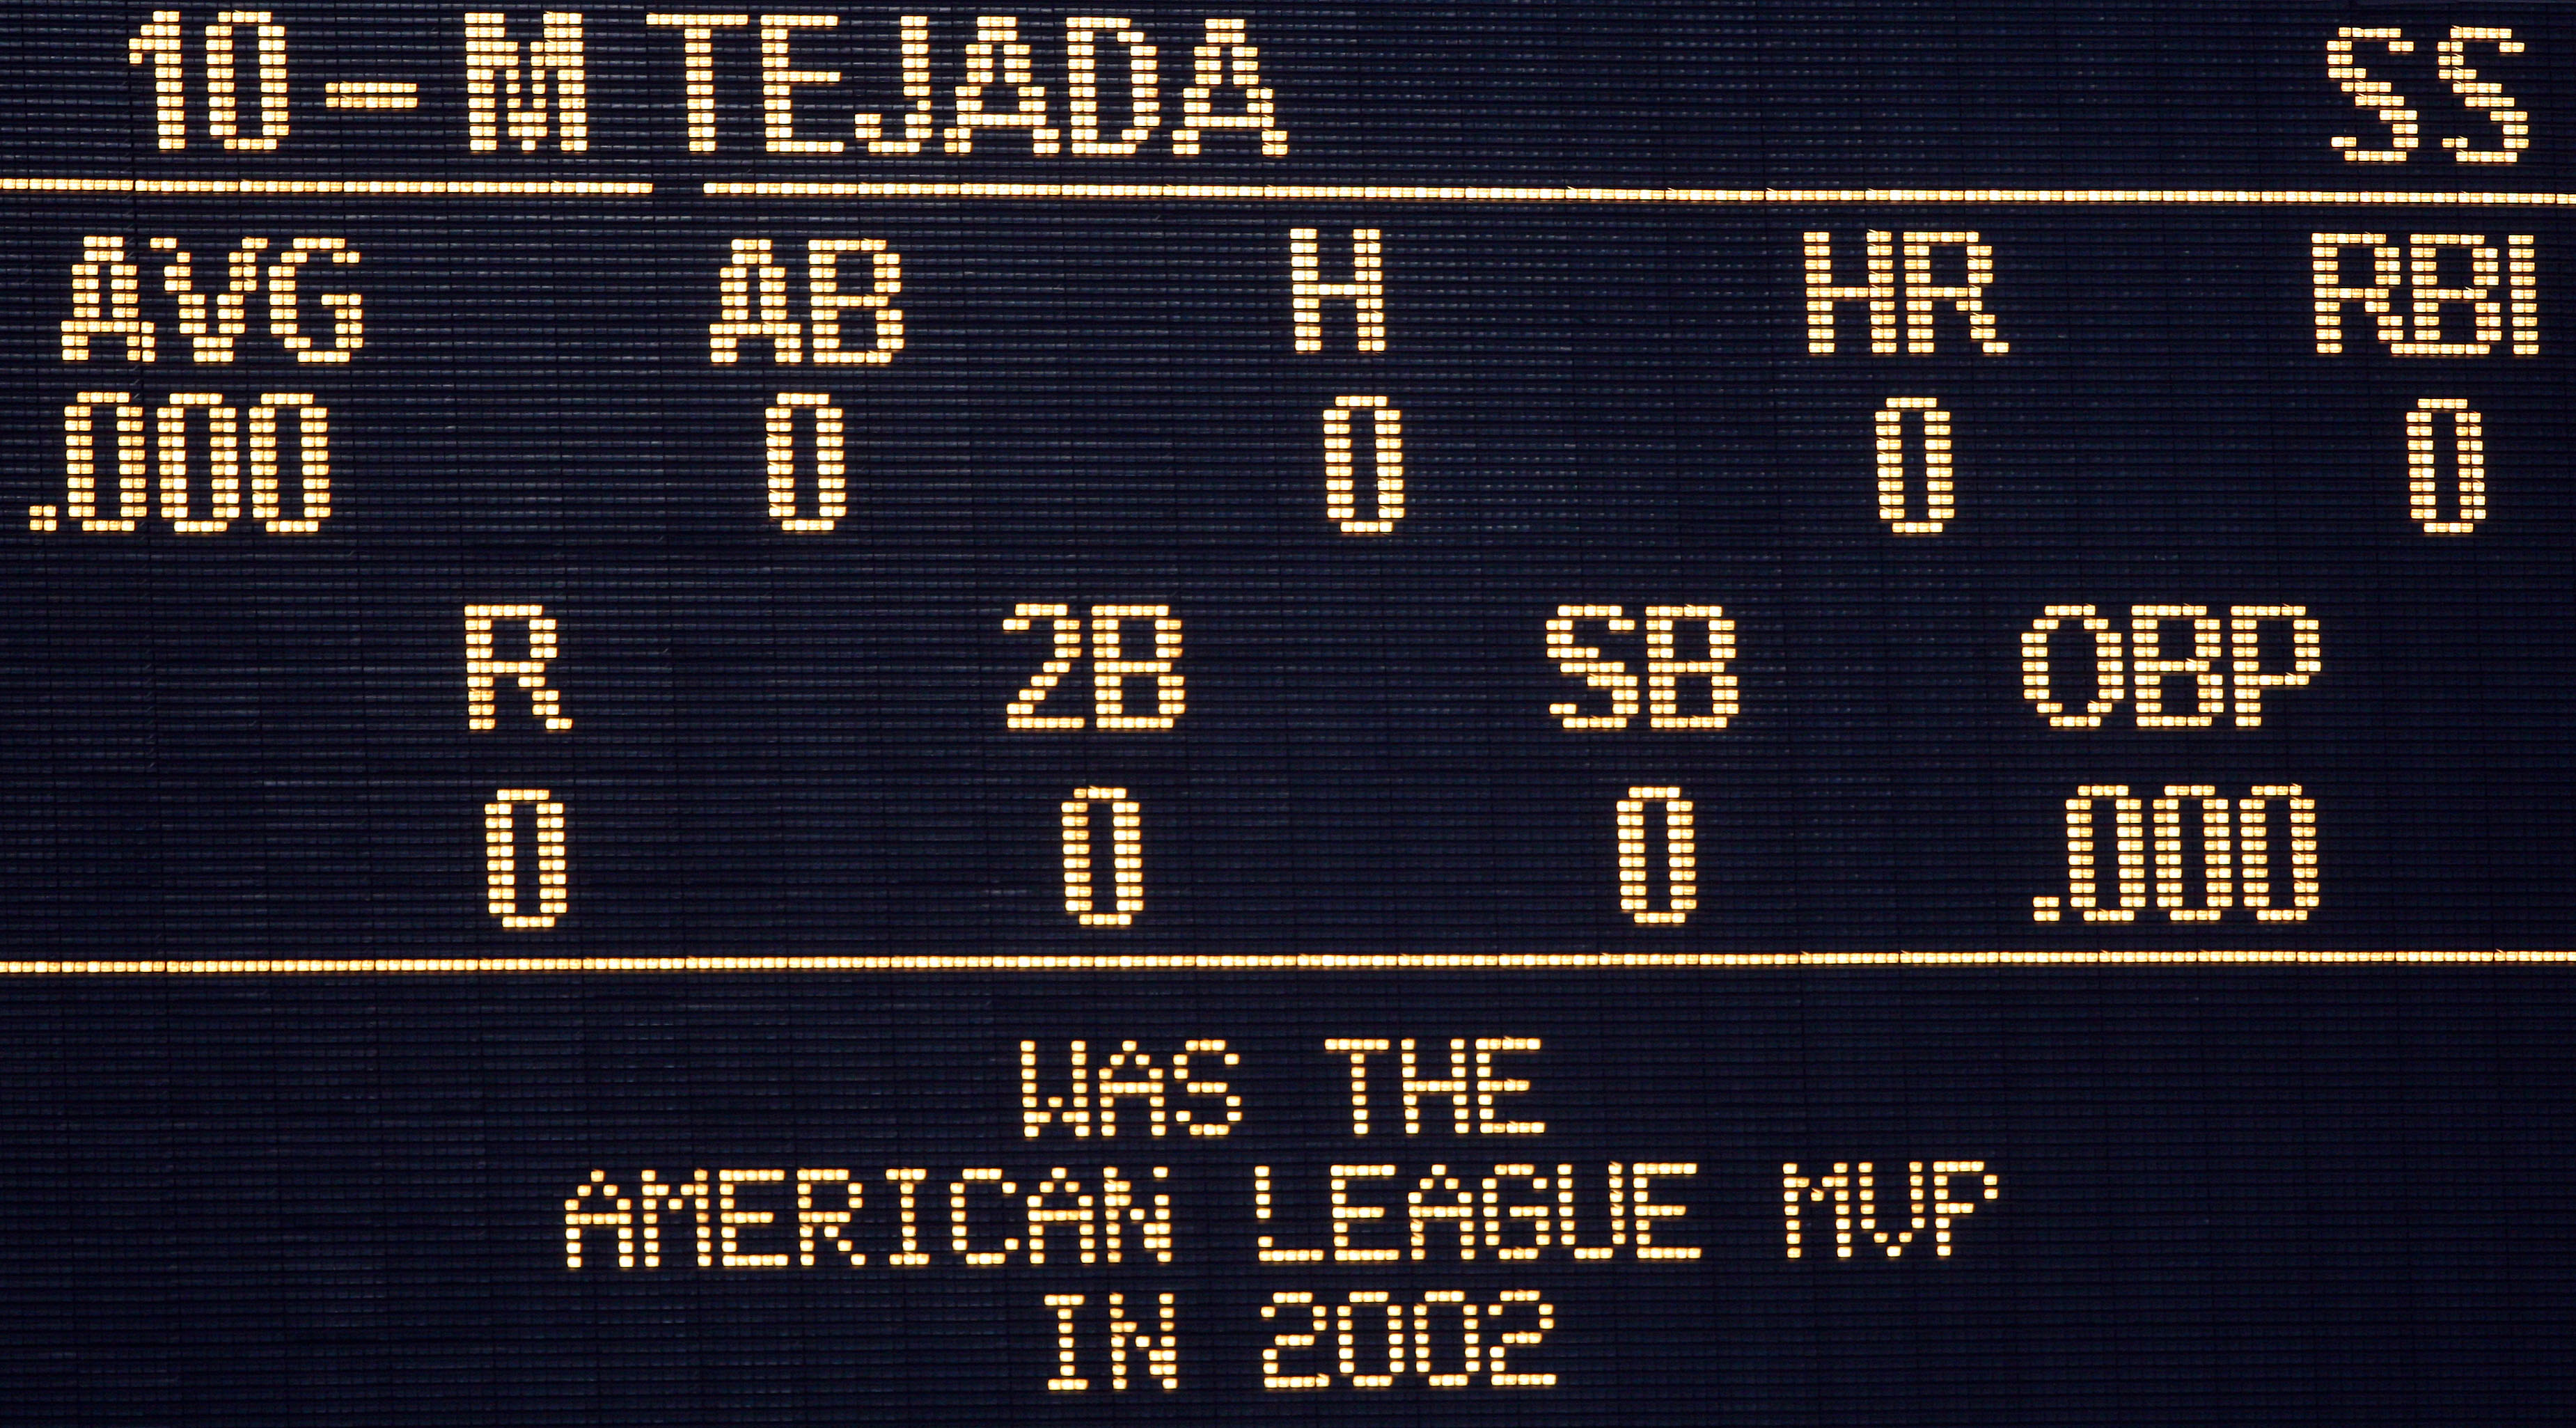 SAN DIEGO, CA - MARCH 31:  Miguel Tejada #10 of the Houston Astros season's statistics are lit up on the board during the game against the San Diego Padres during their Opening Day Game at Petco Park March 31, 2008 in San Diego, California.  (Photo by Don